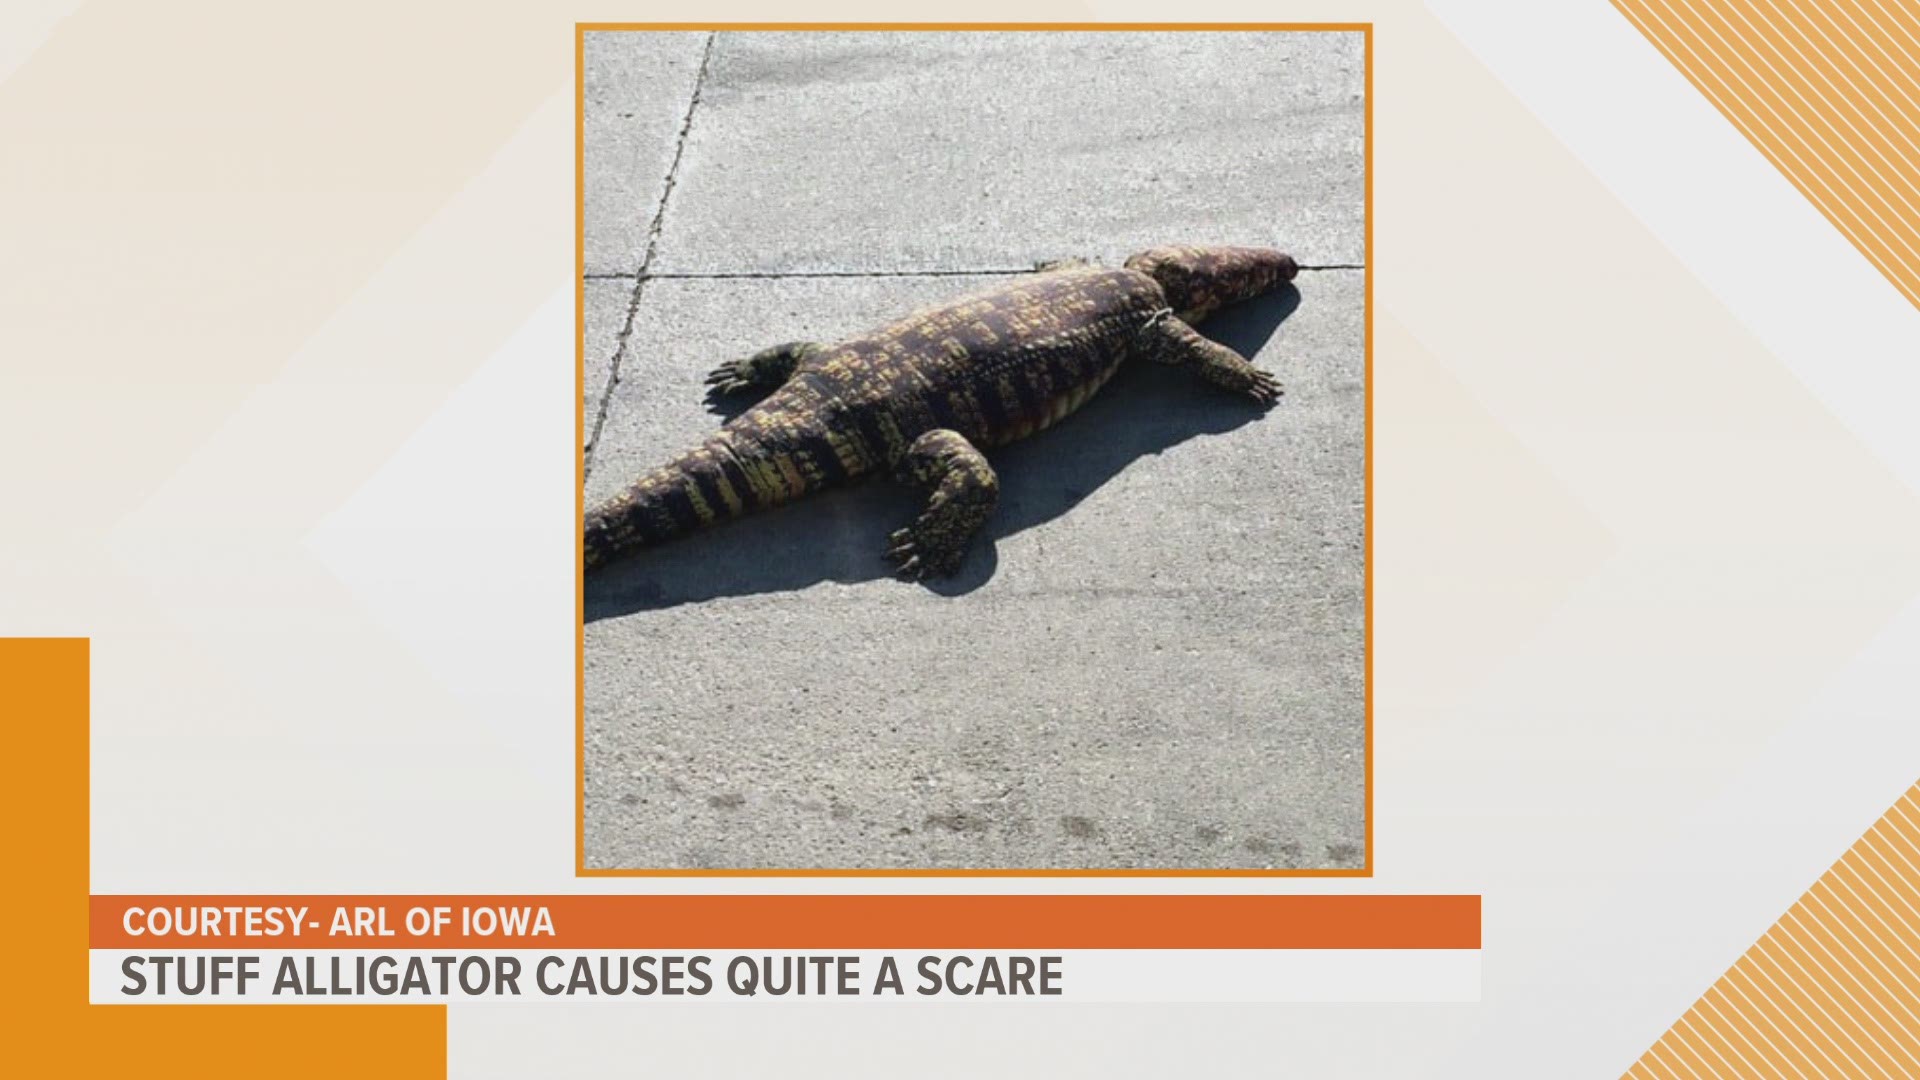 Monday, the Animal Rescue League of Iowa shared the unique experience after residents of an apartment complex reported an alligator in the parking lot.